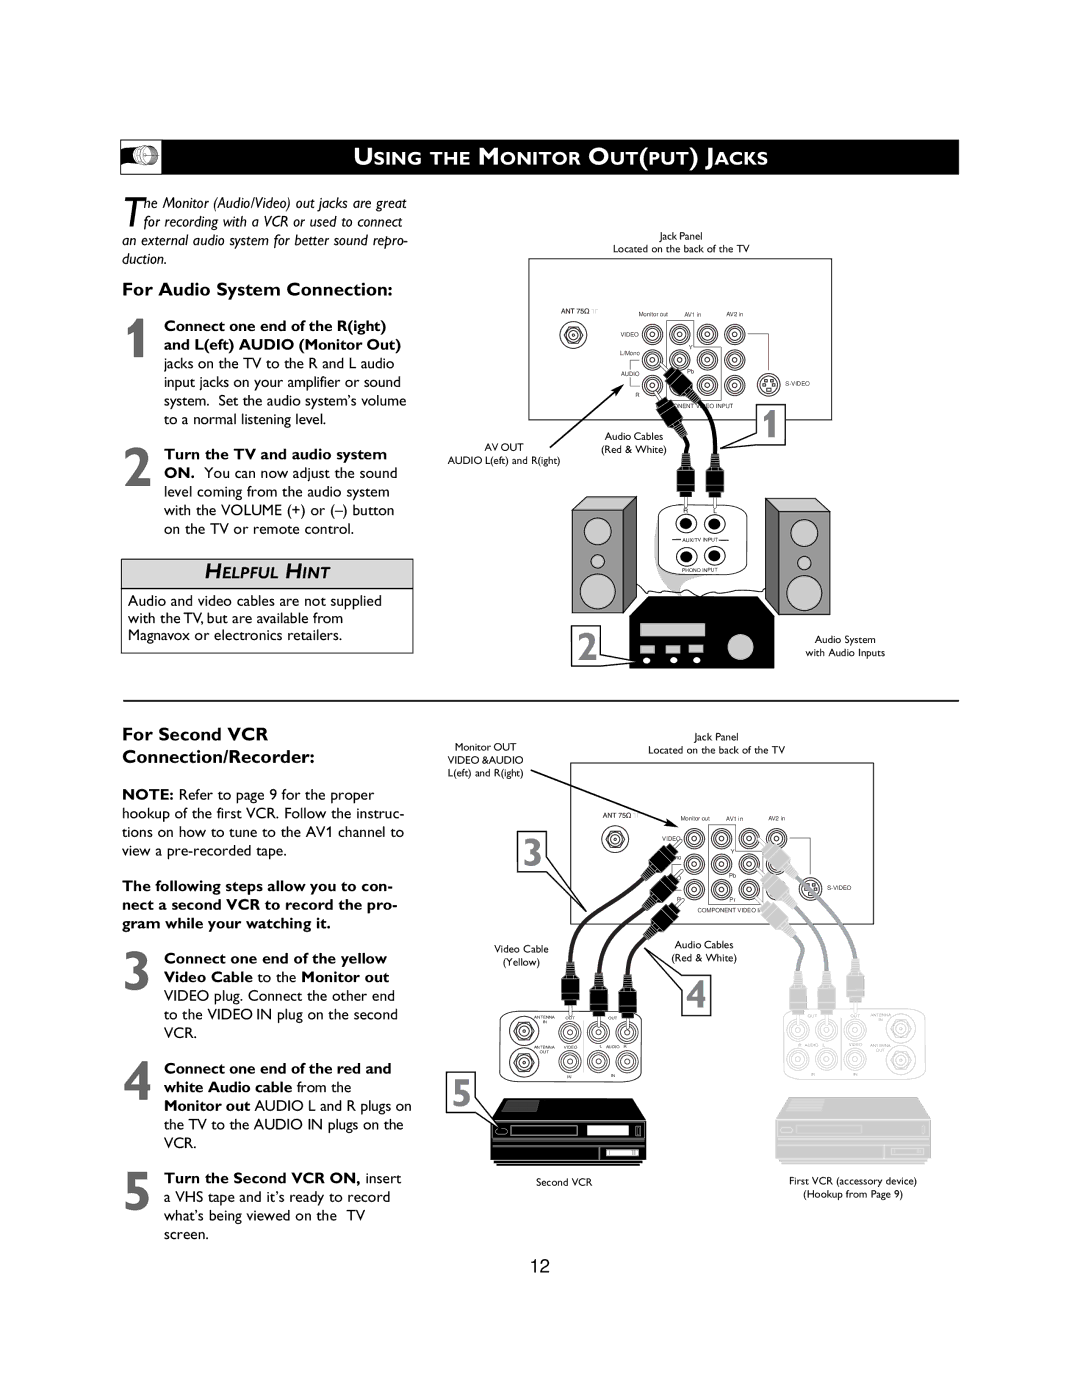 Magnavox 27MS3404R owner manual Using the Monitor Output Jacks, Connect one end of the Right and Left Audio Monitor Out 